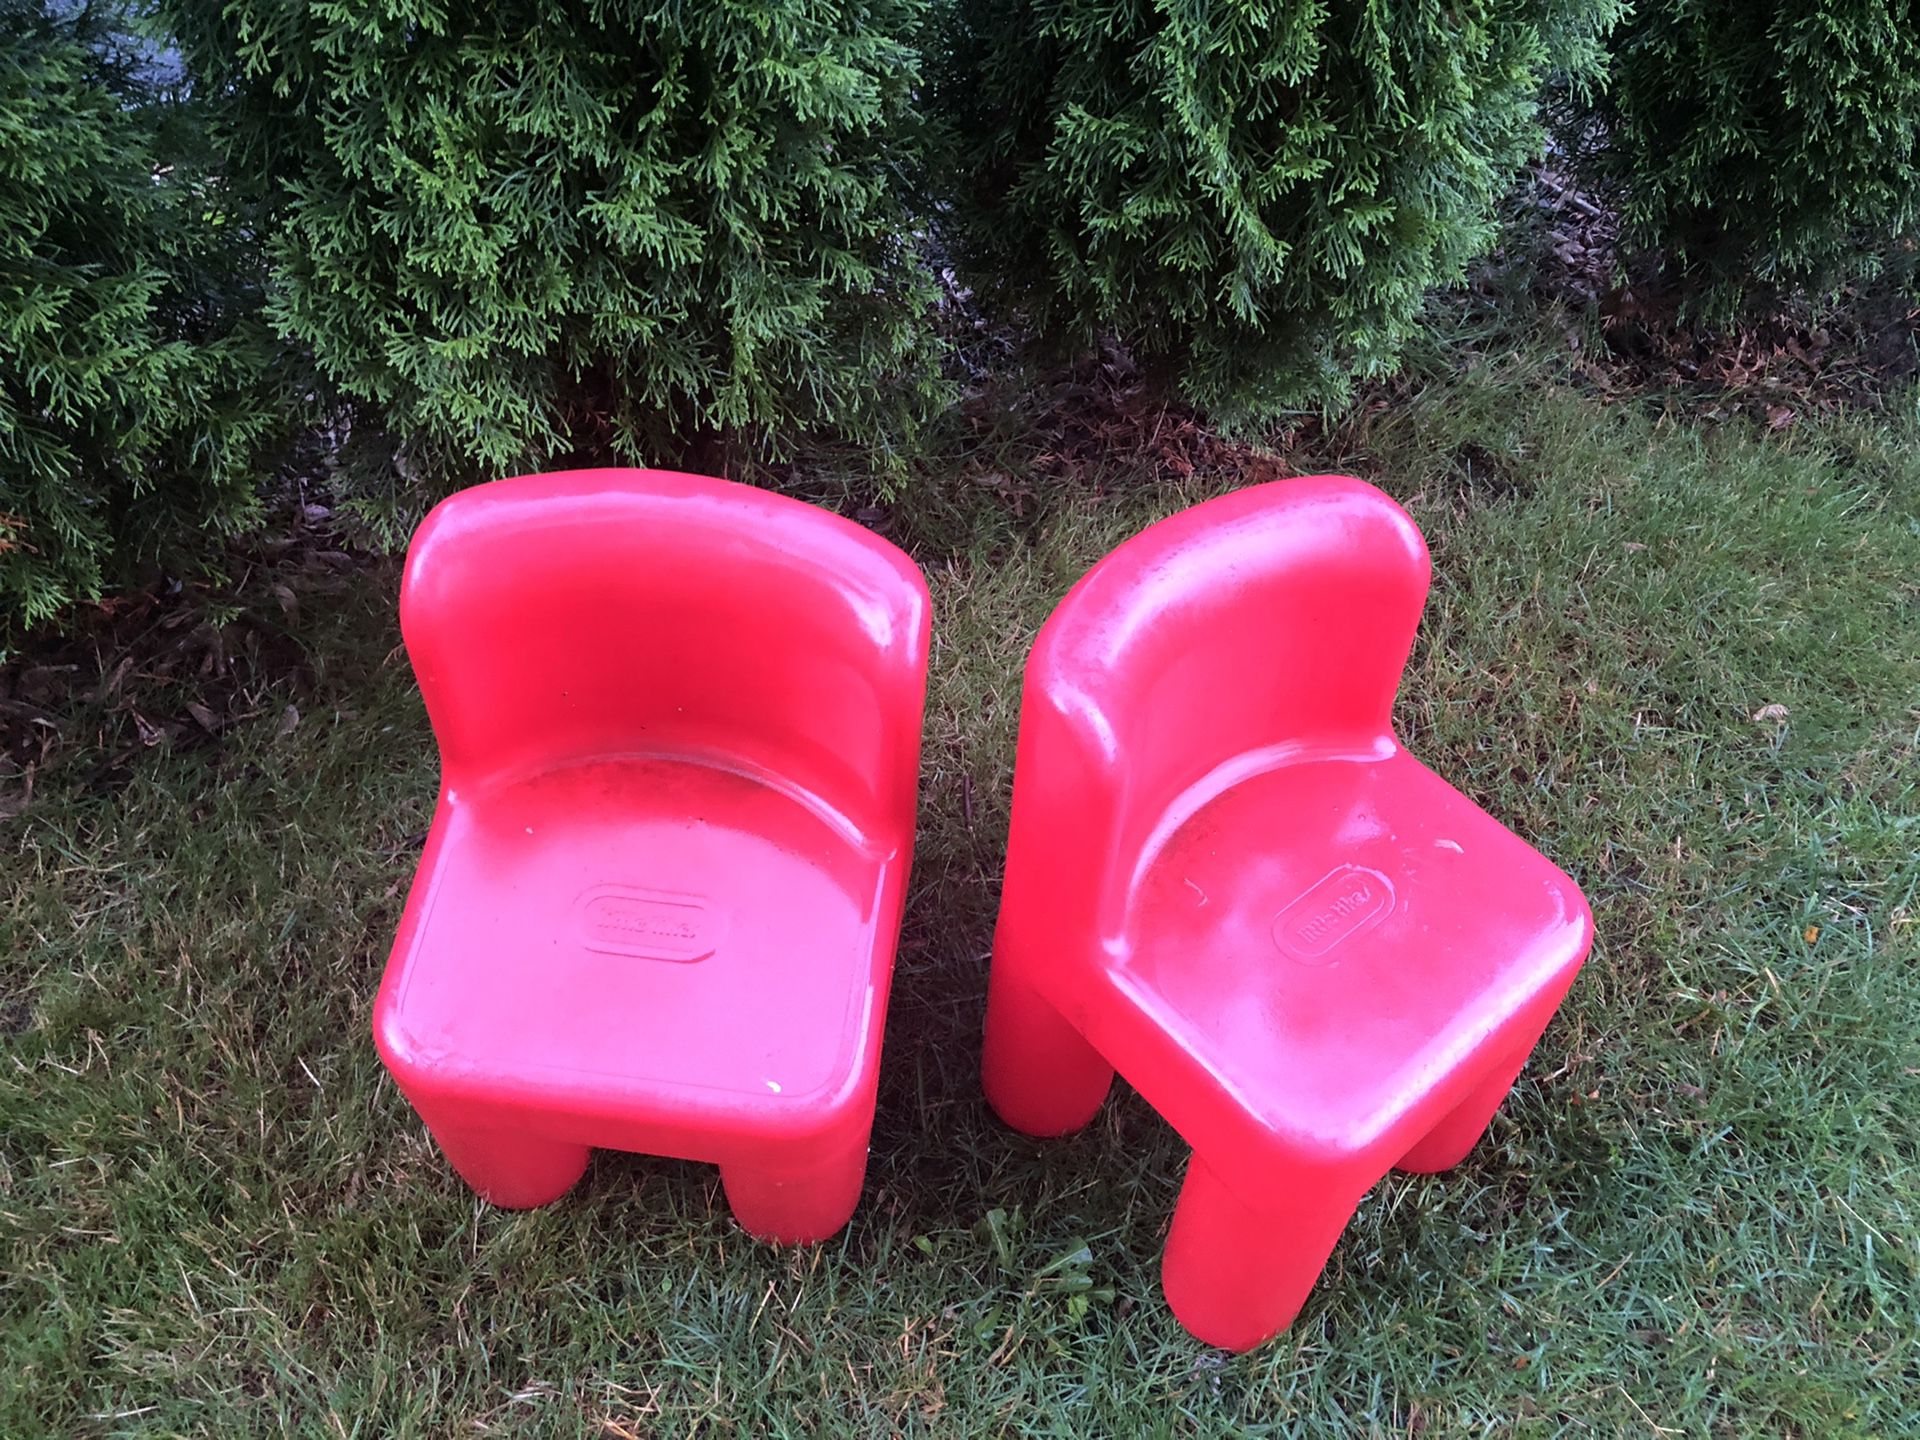 Little tikes red chair for kids